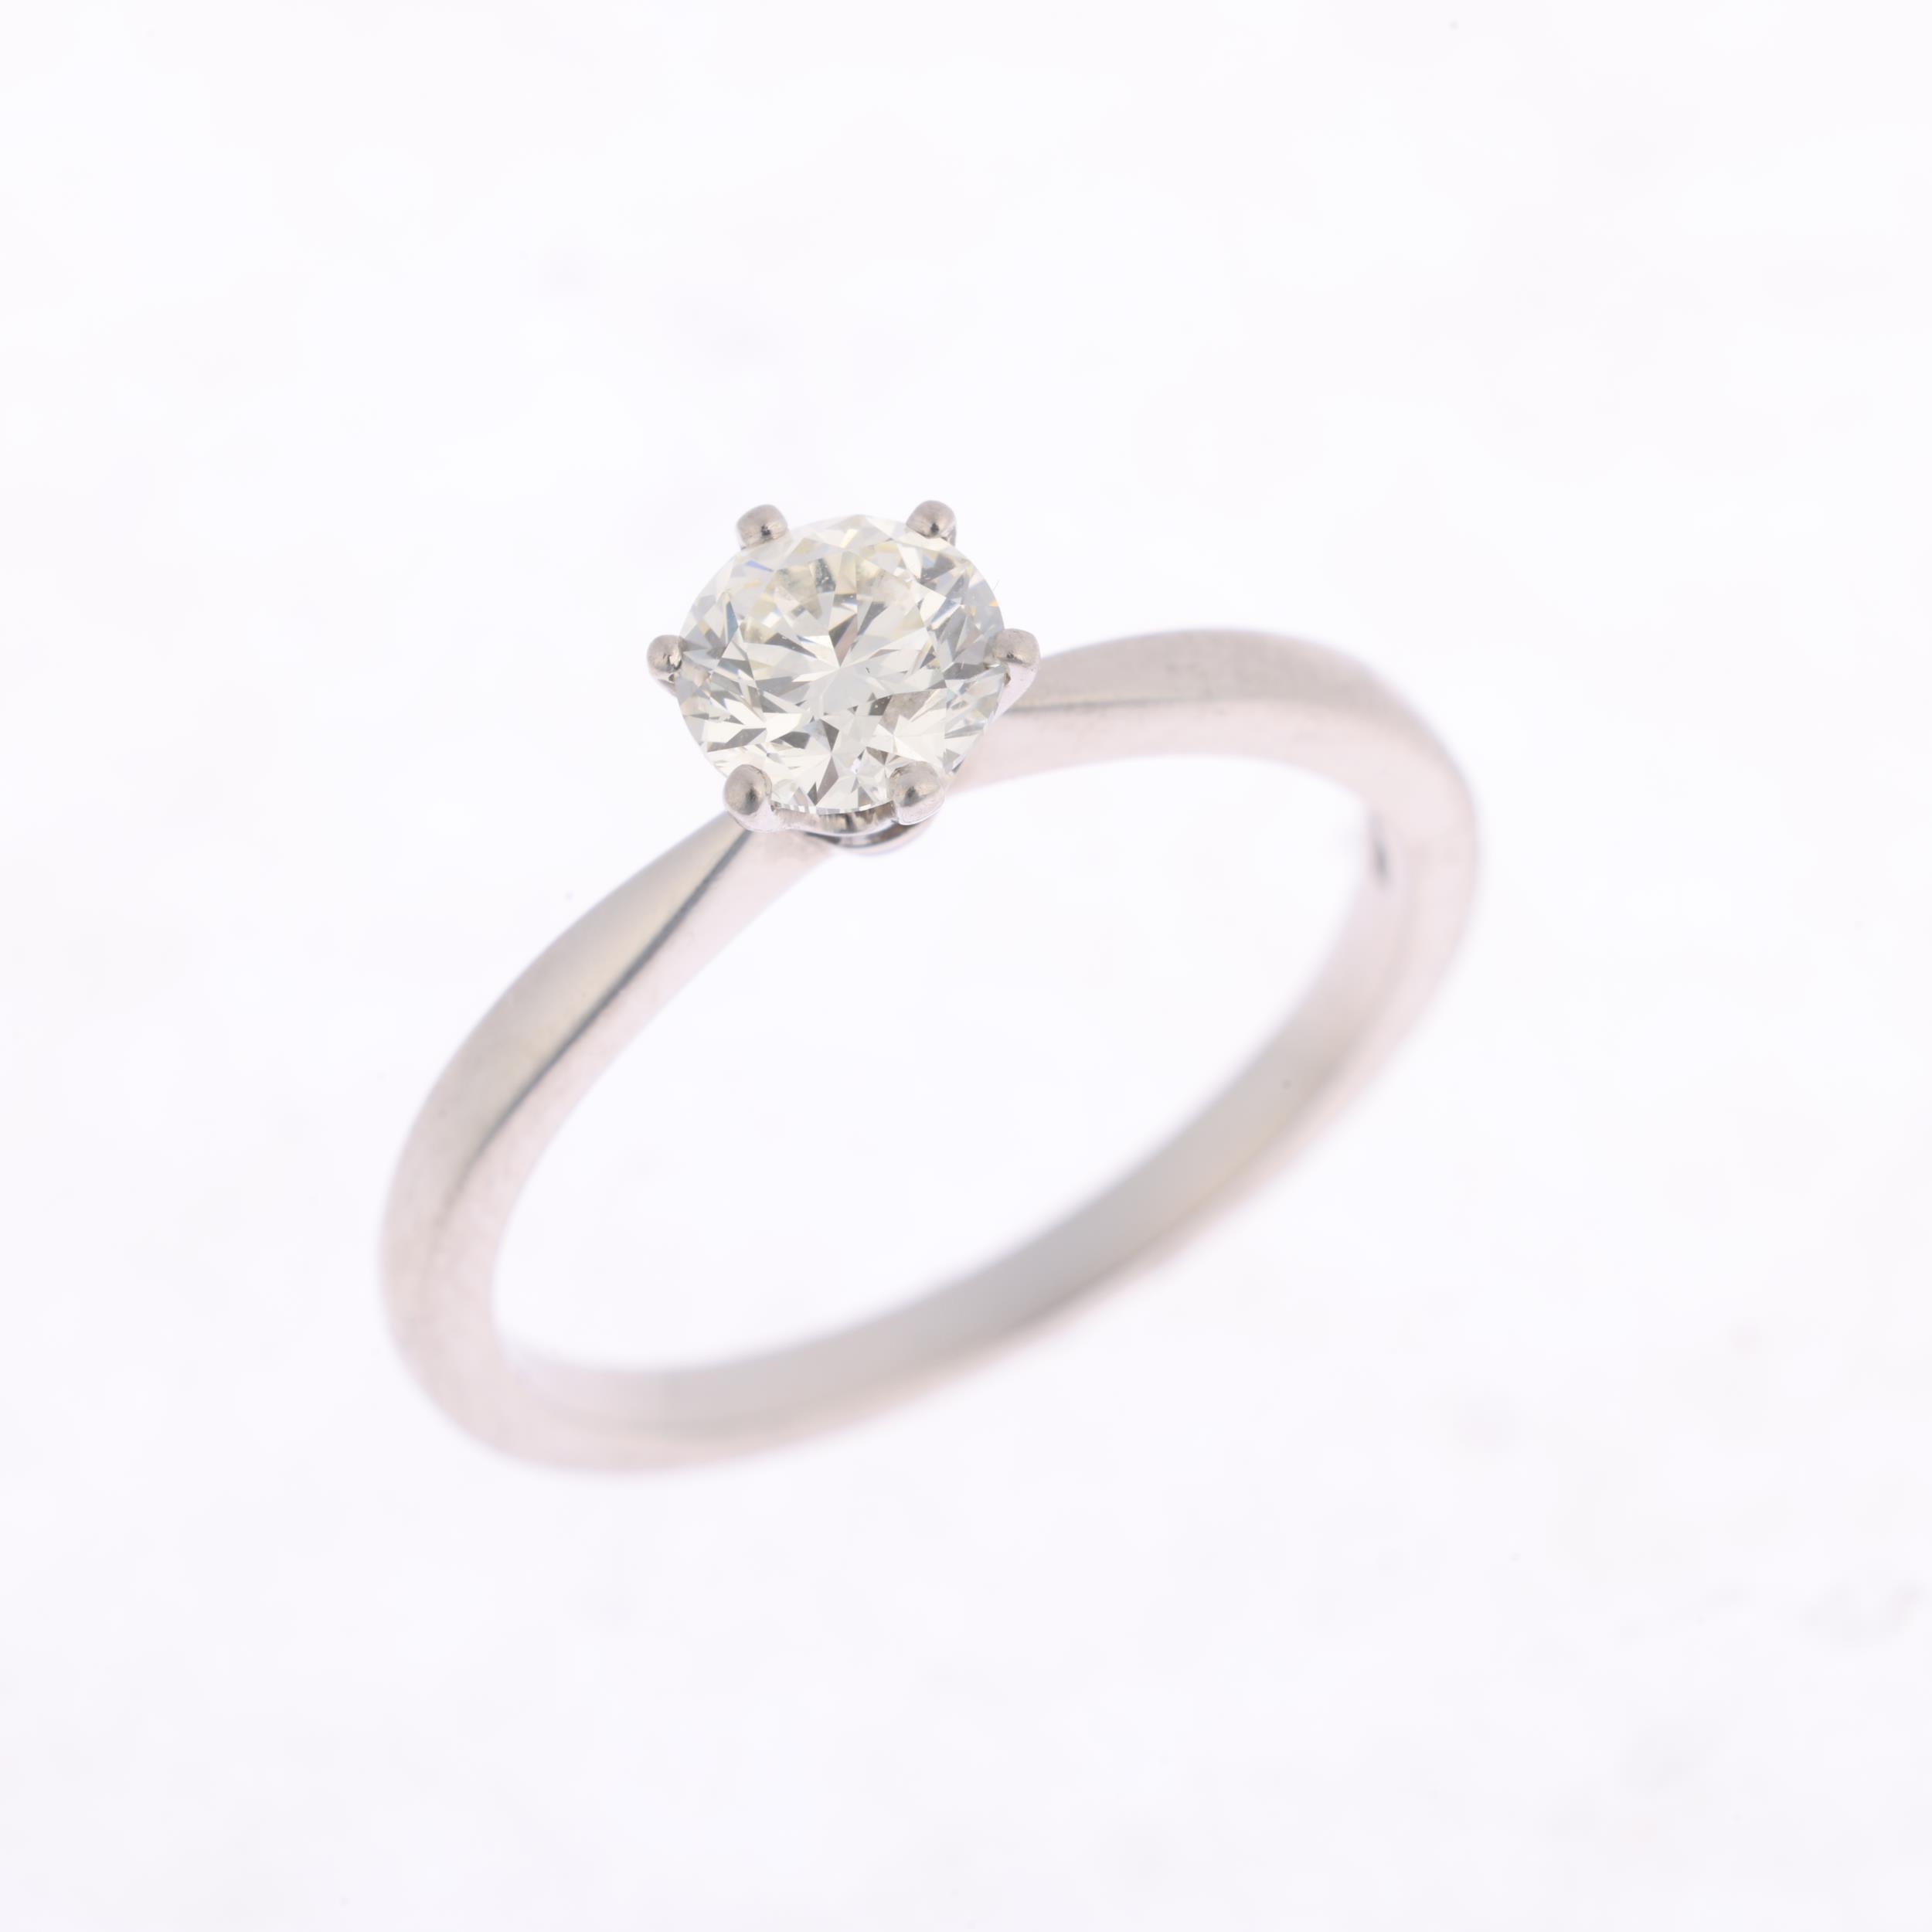 A platinum 0.7ct solitaire diamond ring, 6-claw set with modern round brilliant-cut diamond, - Image 2 of 4